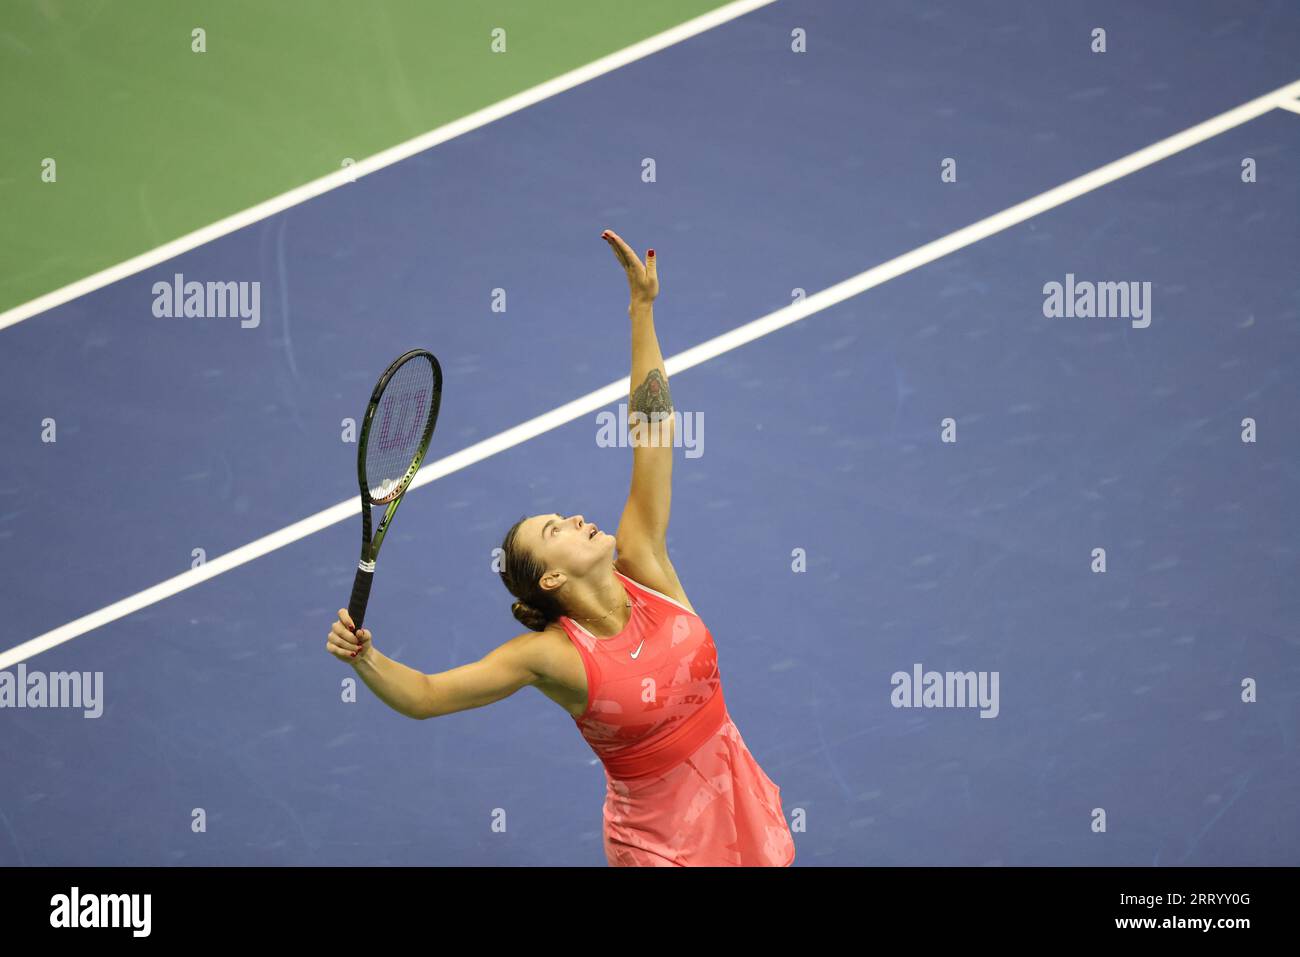 New York, United States. 09th Sep, 2023. Ayrna Sabalenka during the women's final against Coco Gauff. Gauff won the match to claim the US Open title and her first grand slam victory. Credit: Adam Stoltman/Alamy Live News Stock Photo